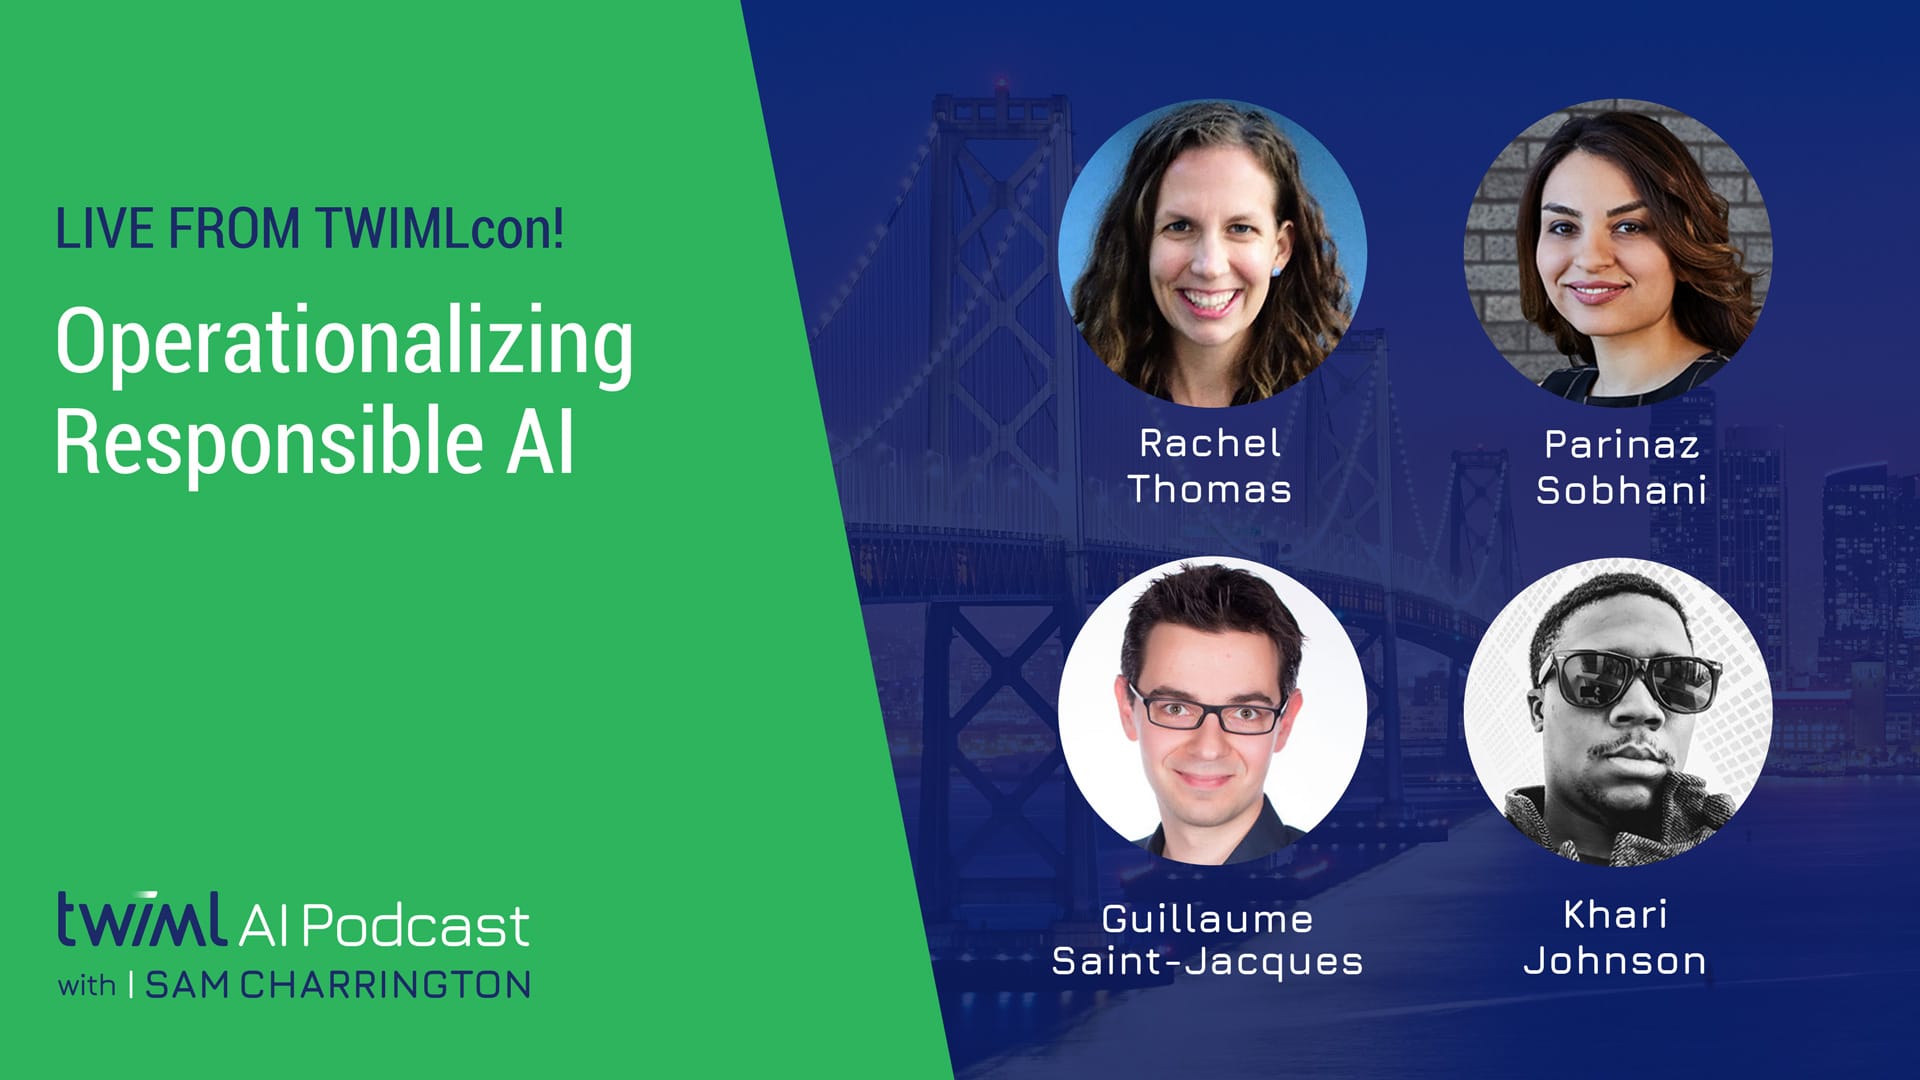 Banner Image: Live from TWIMLcon! Operationalizing Responsible AI - Podcast Discussion